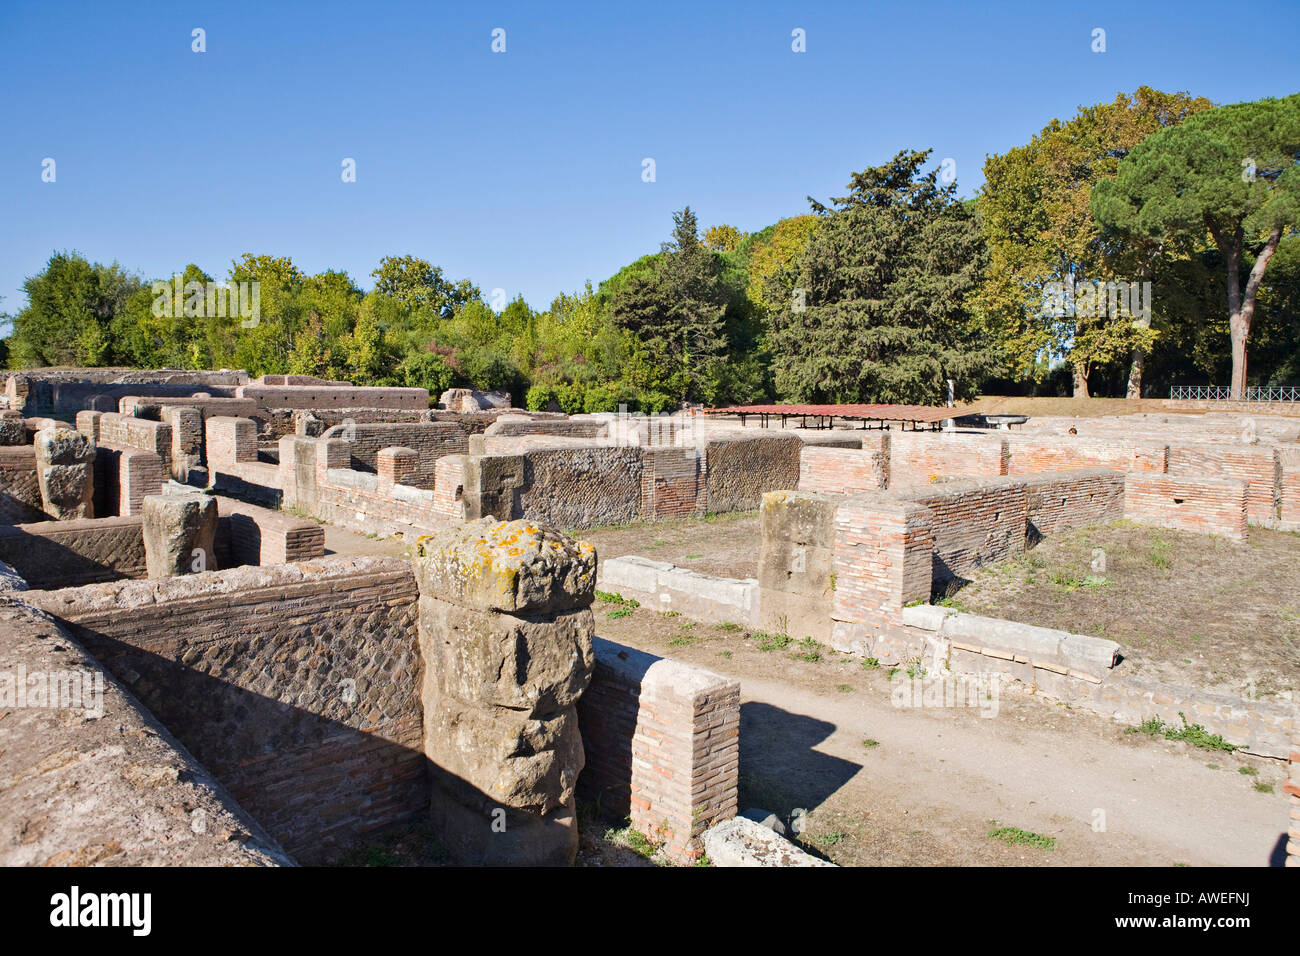 Warehouses dating to the Roman Republic, Ostia Antica archaeological site, Rome, Italy, Europe Stock Photo